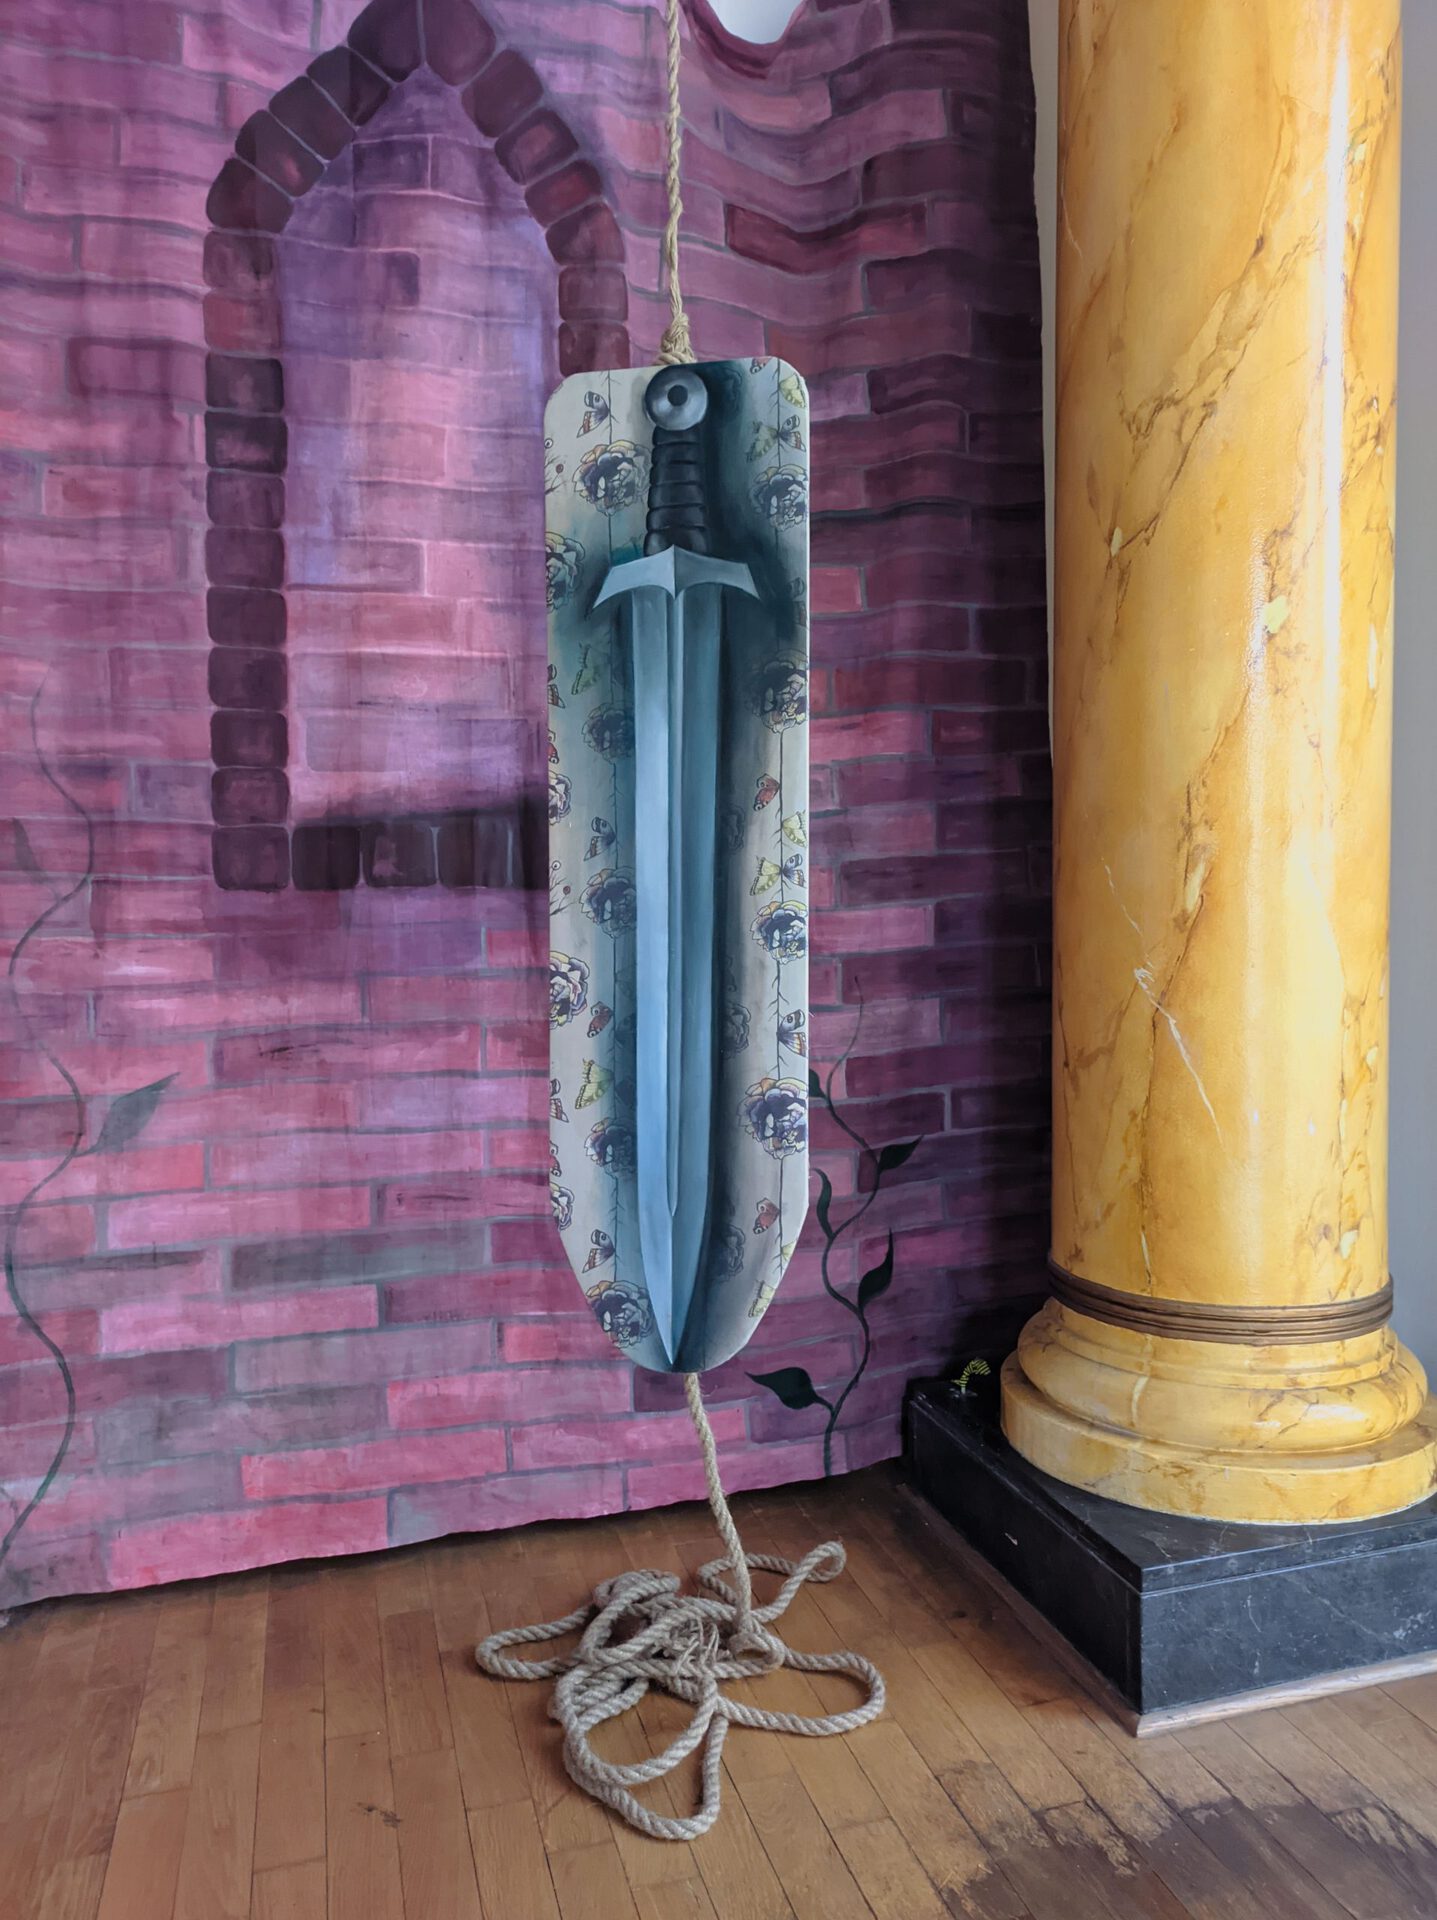 Maryna Sakowska, On the sword and on the distaff side, 2021, oil on the ironing board, 108x29 cm